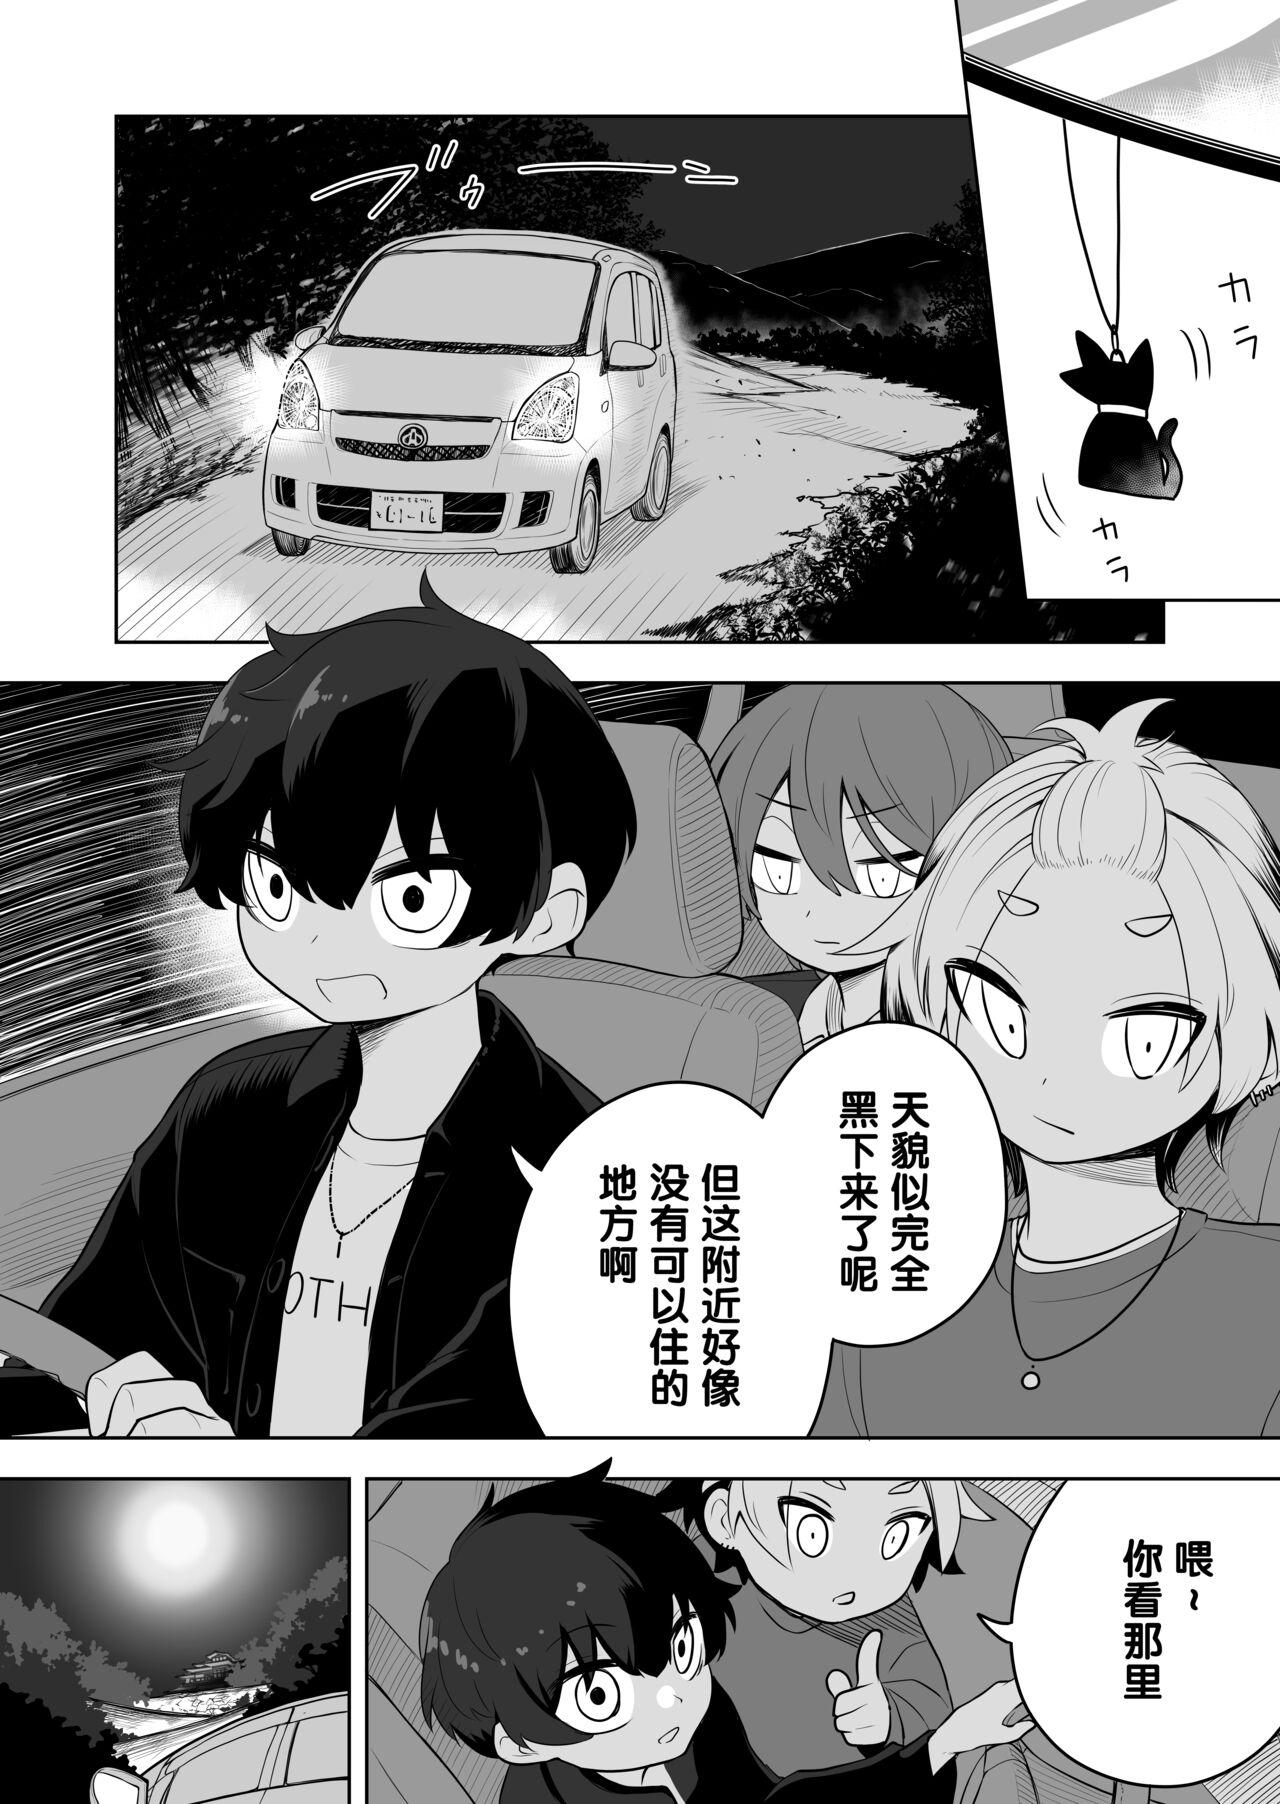 Family Roleplay 猫山怪闻 Spoon - Page 3